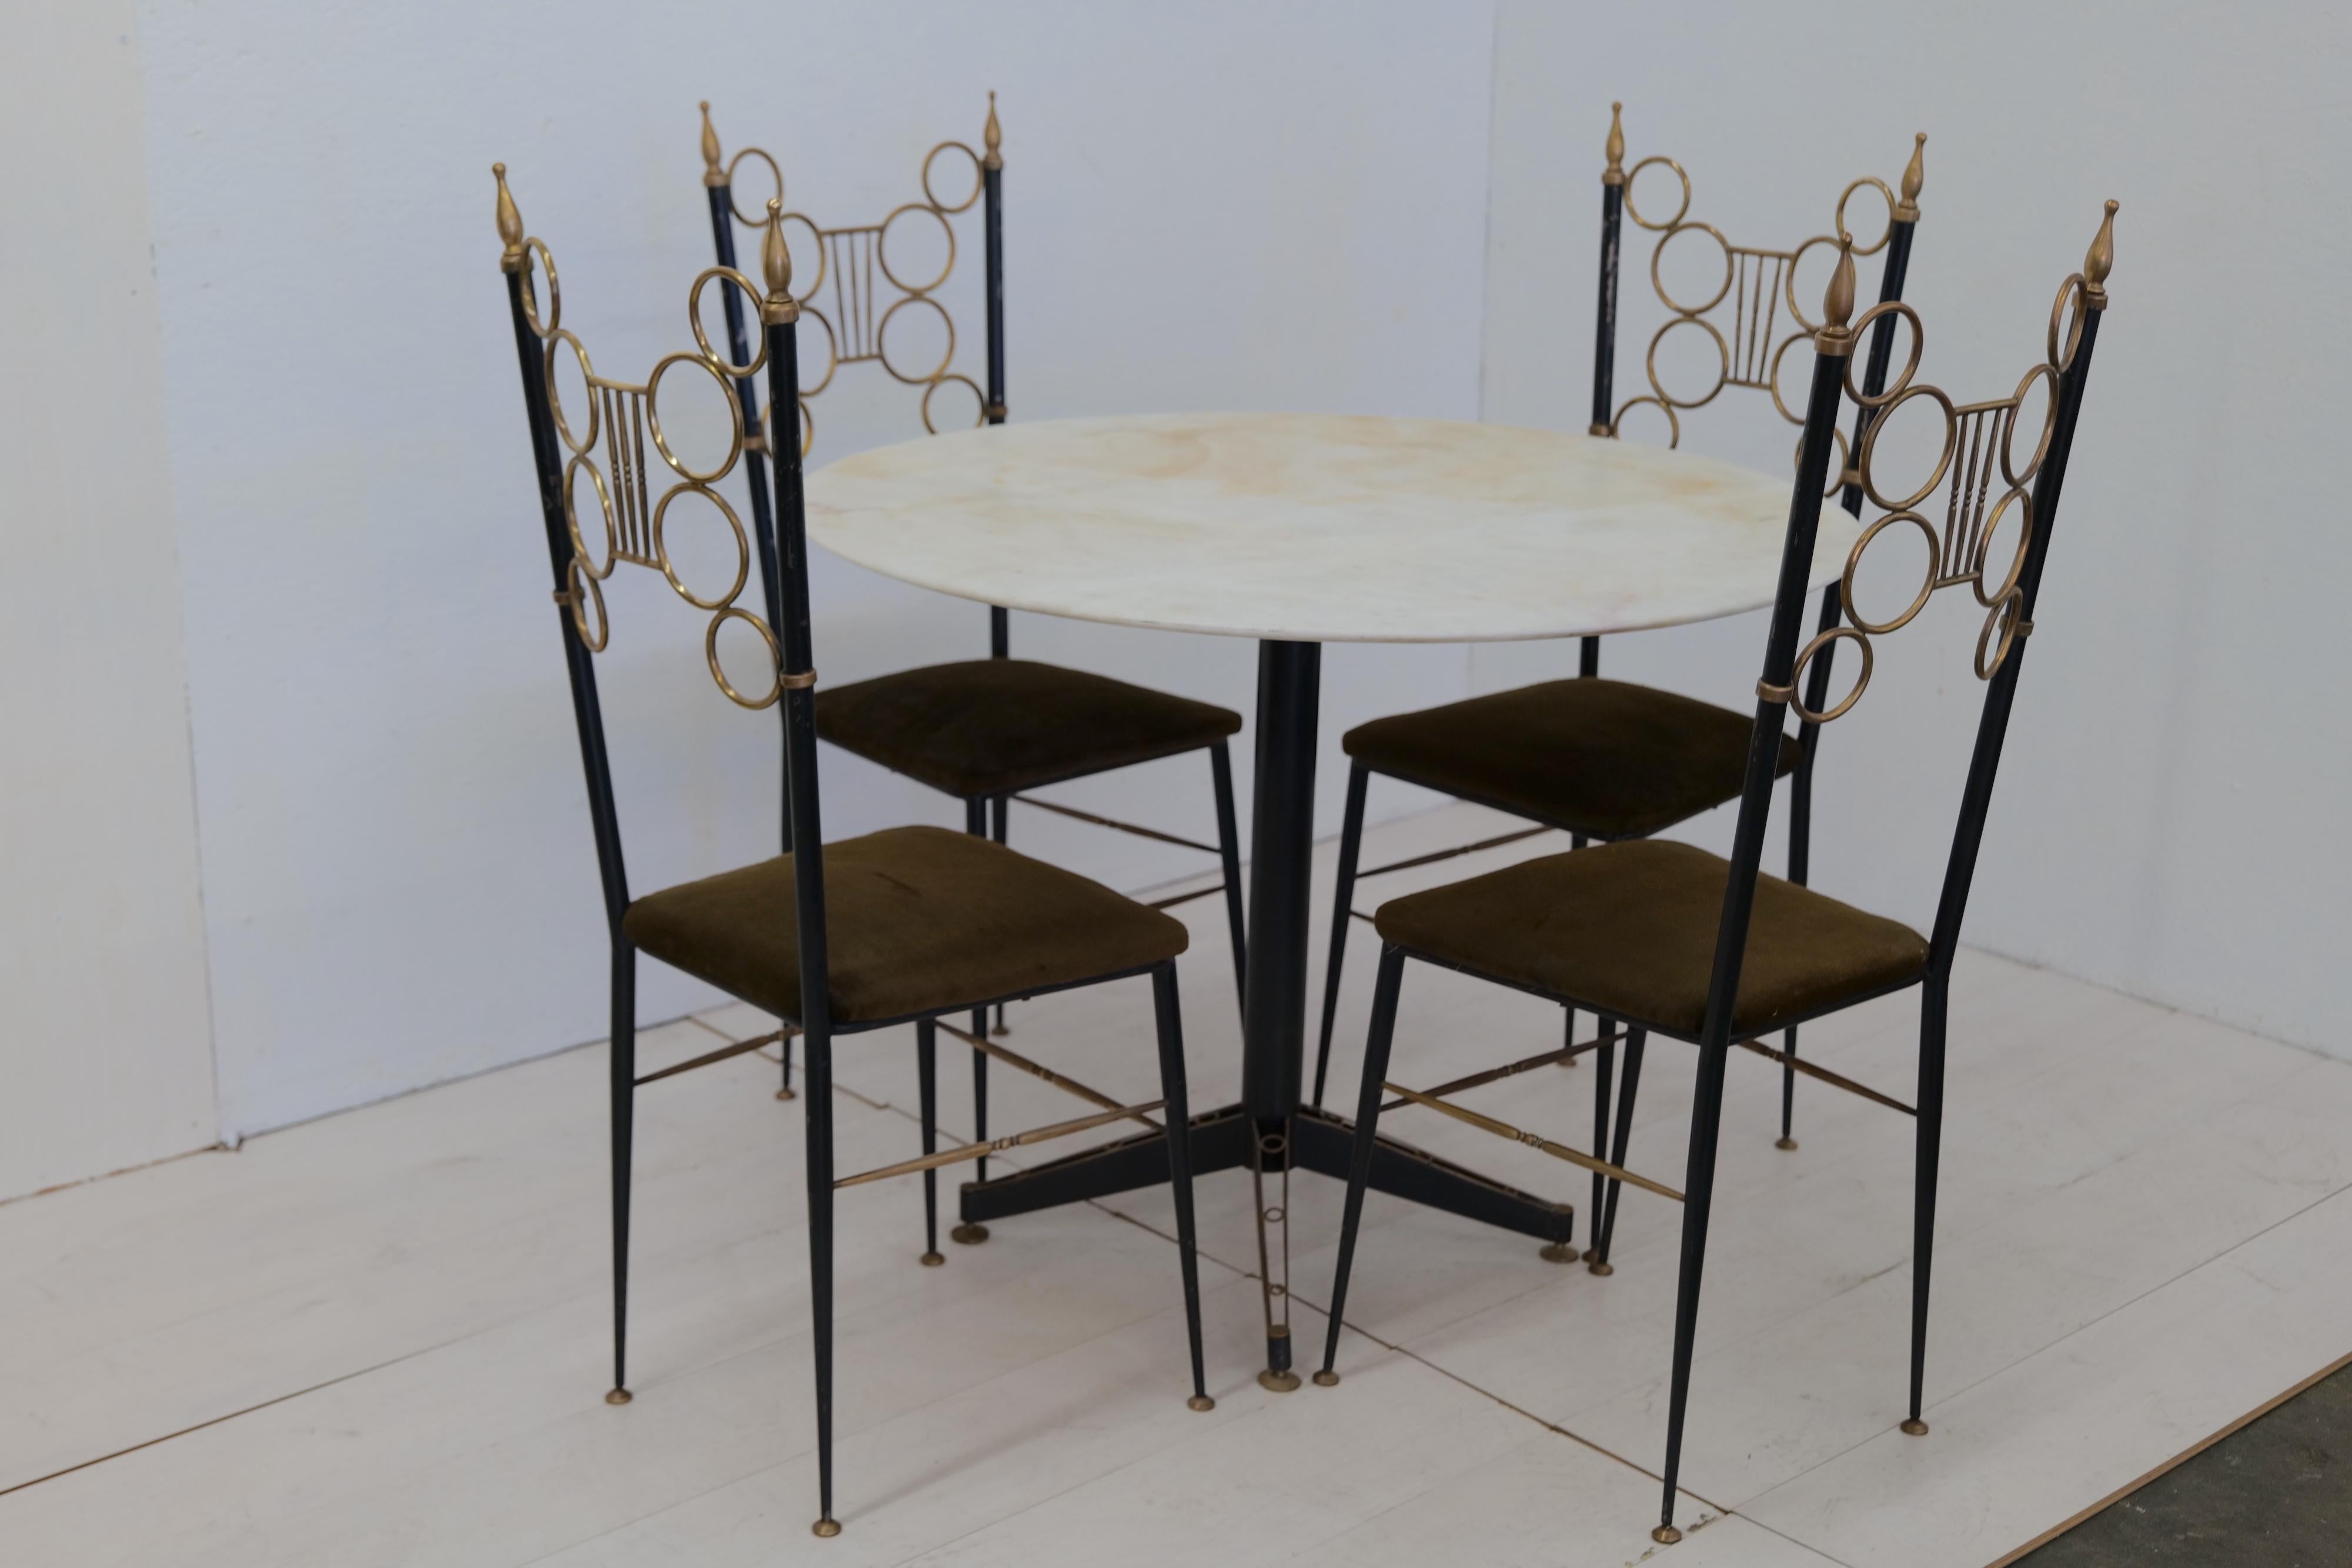 Midcentury Italian Set of 4 Chairs and Marble Table, 1980s For Sale 1